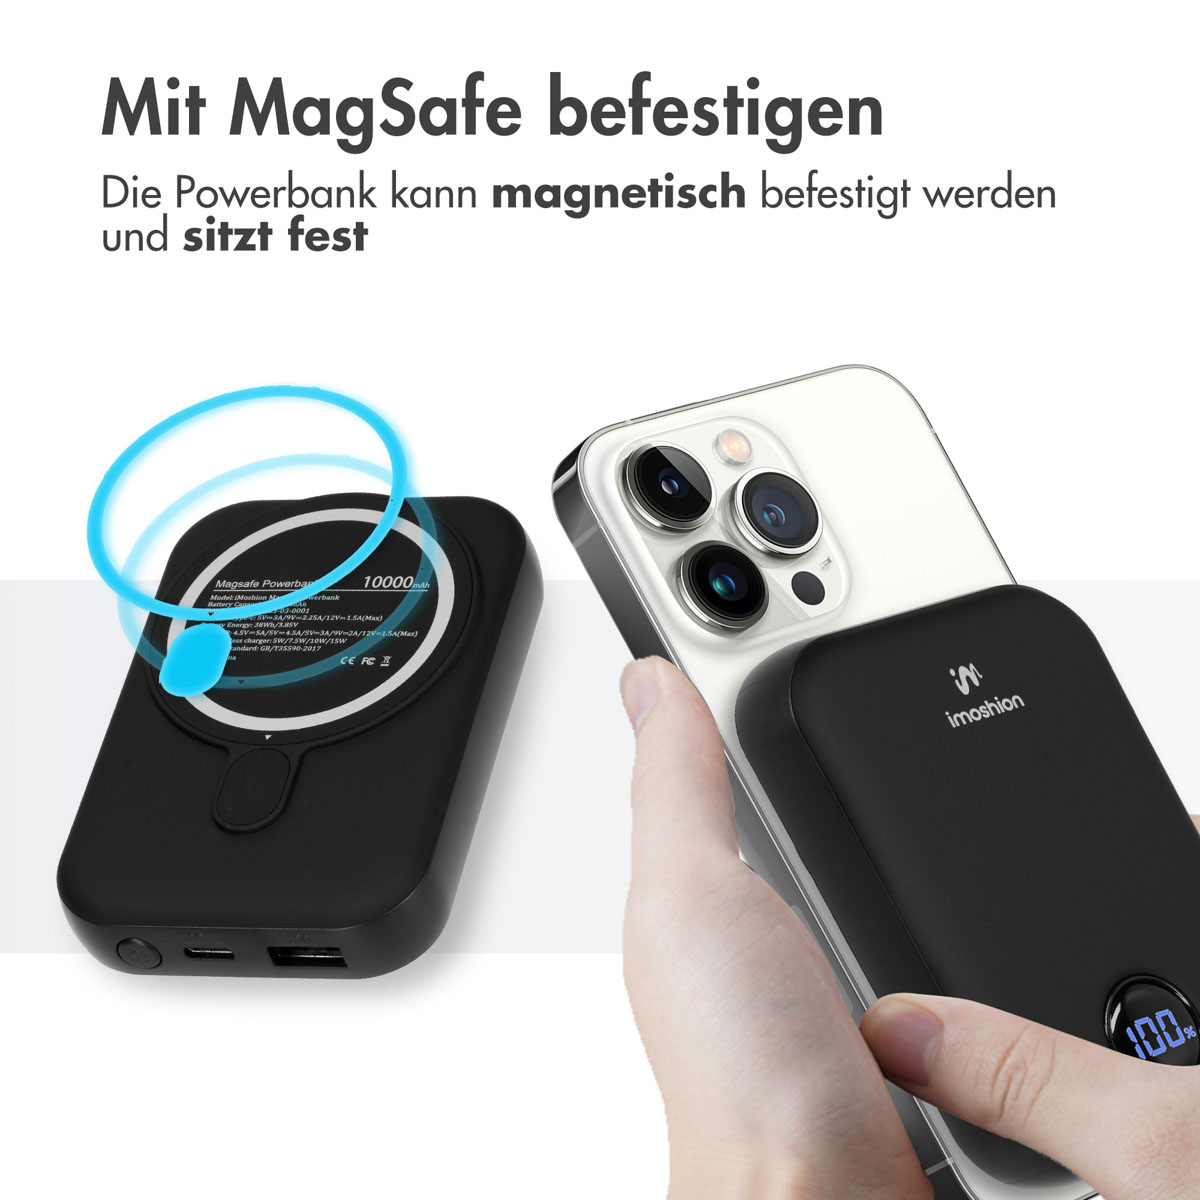 IMOSHION Power mAh Powerbank Charge Quick Schwarz 10000 Delivery MagSafe 